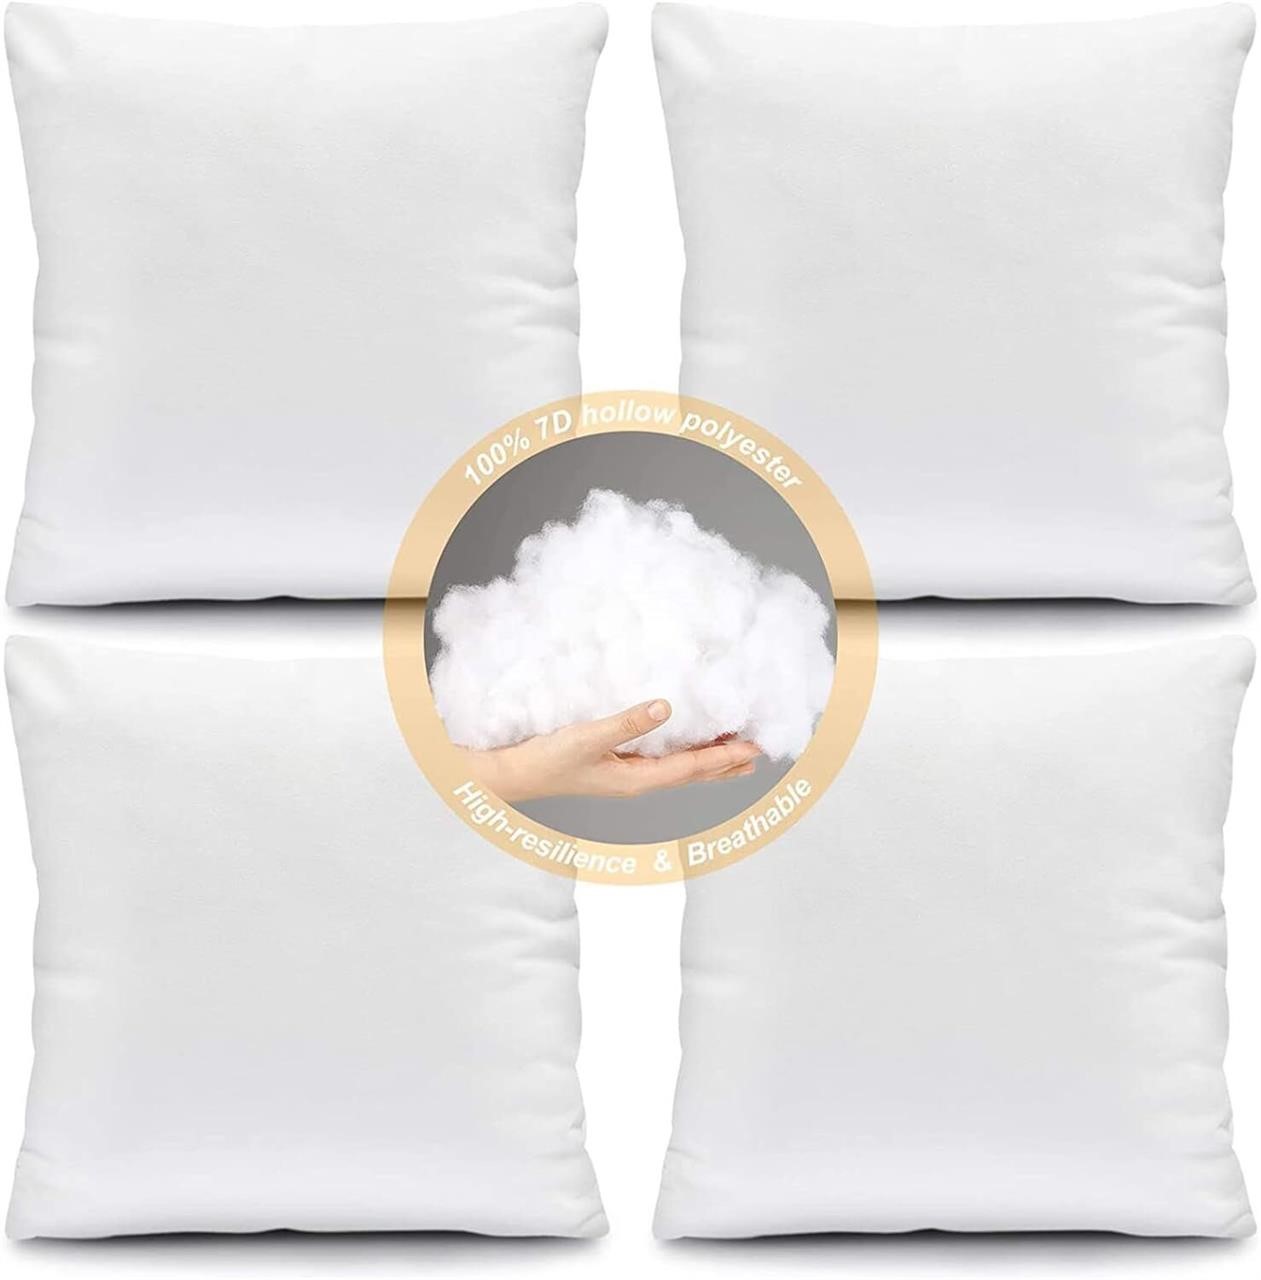 Fixwal 24x24 Inch Pillow Inserts  Set of 4.